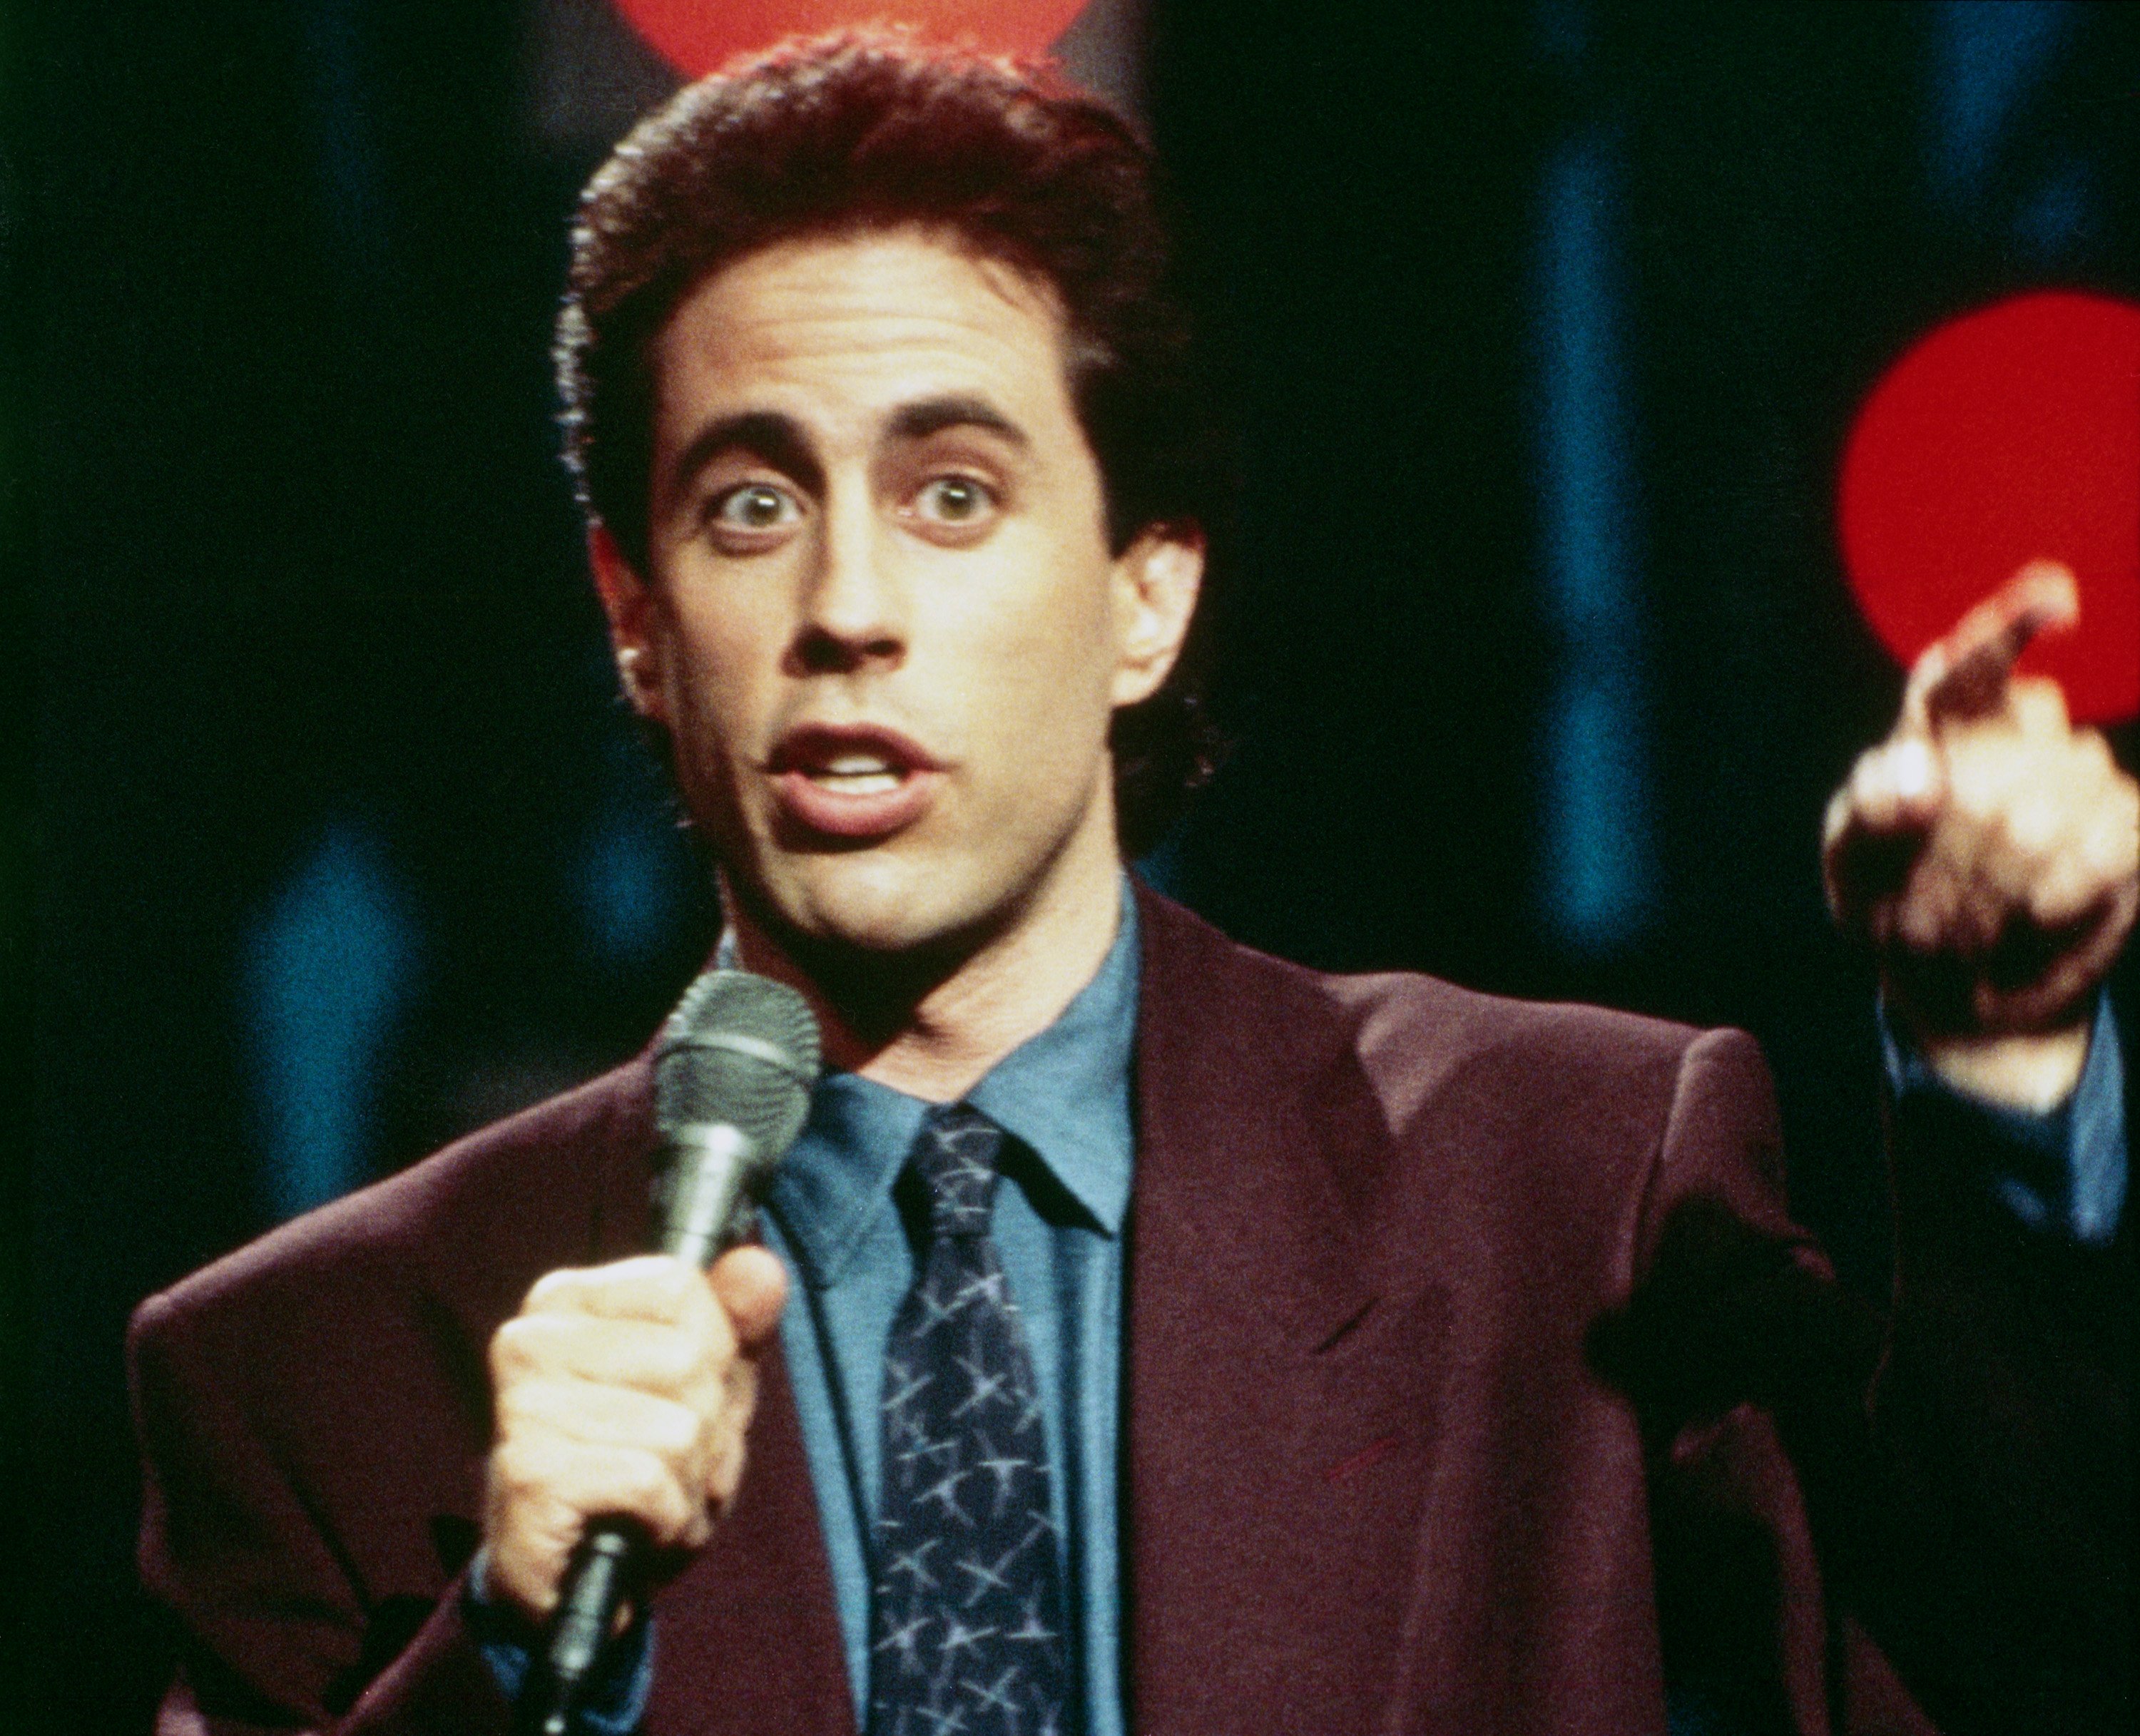 Jerry Seinfeld |NBCU Photo Bank/NBCUniversal via Getty Images via Getty Images